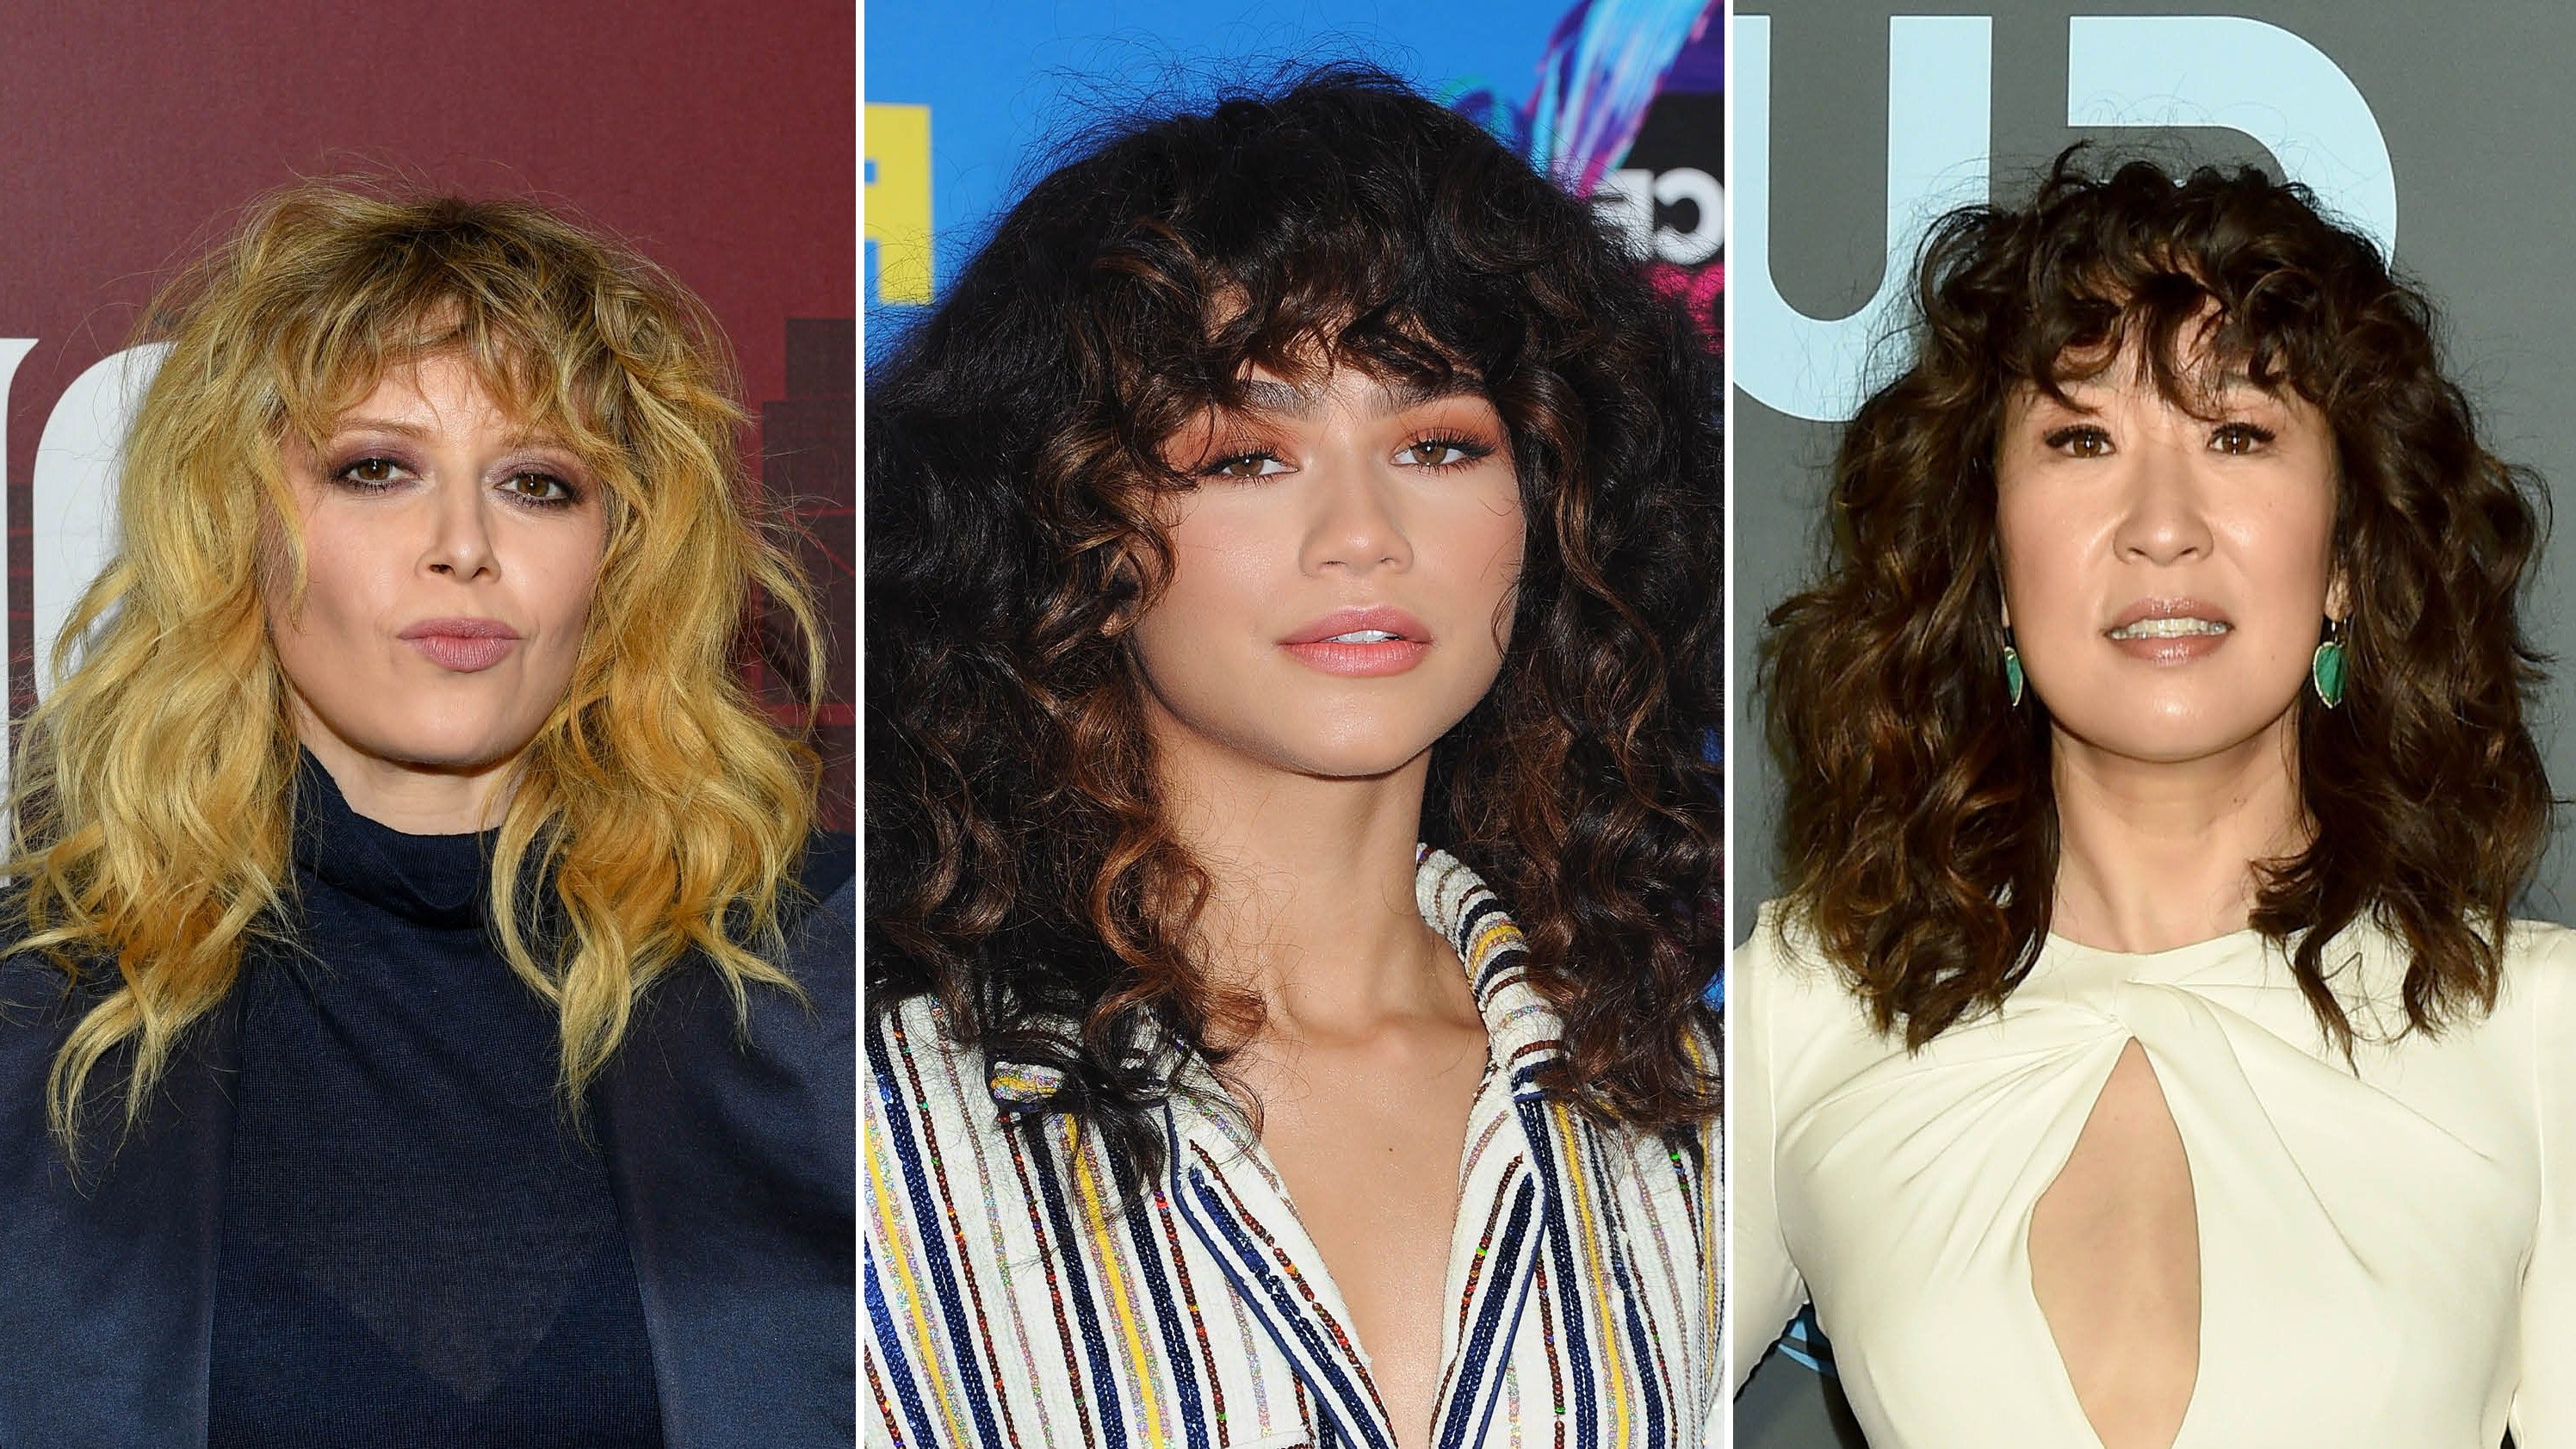 Hairstylist Joseph Maine Demos Shag Cut On Wavy And Curly Hair — See Video  | Allure In Recent Shaggy Mid Length Hair With Massive Bangs (Photo 16 of 18)